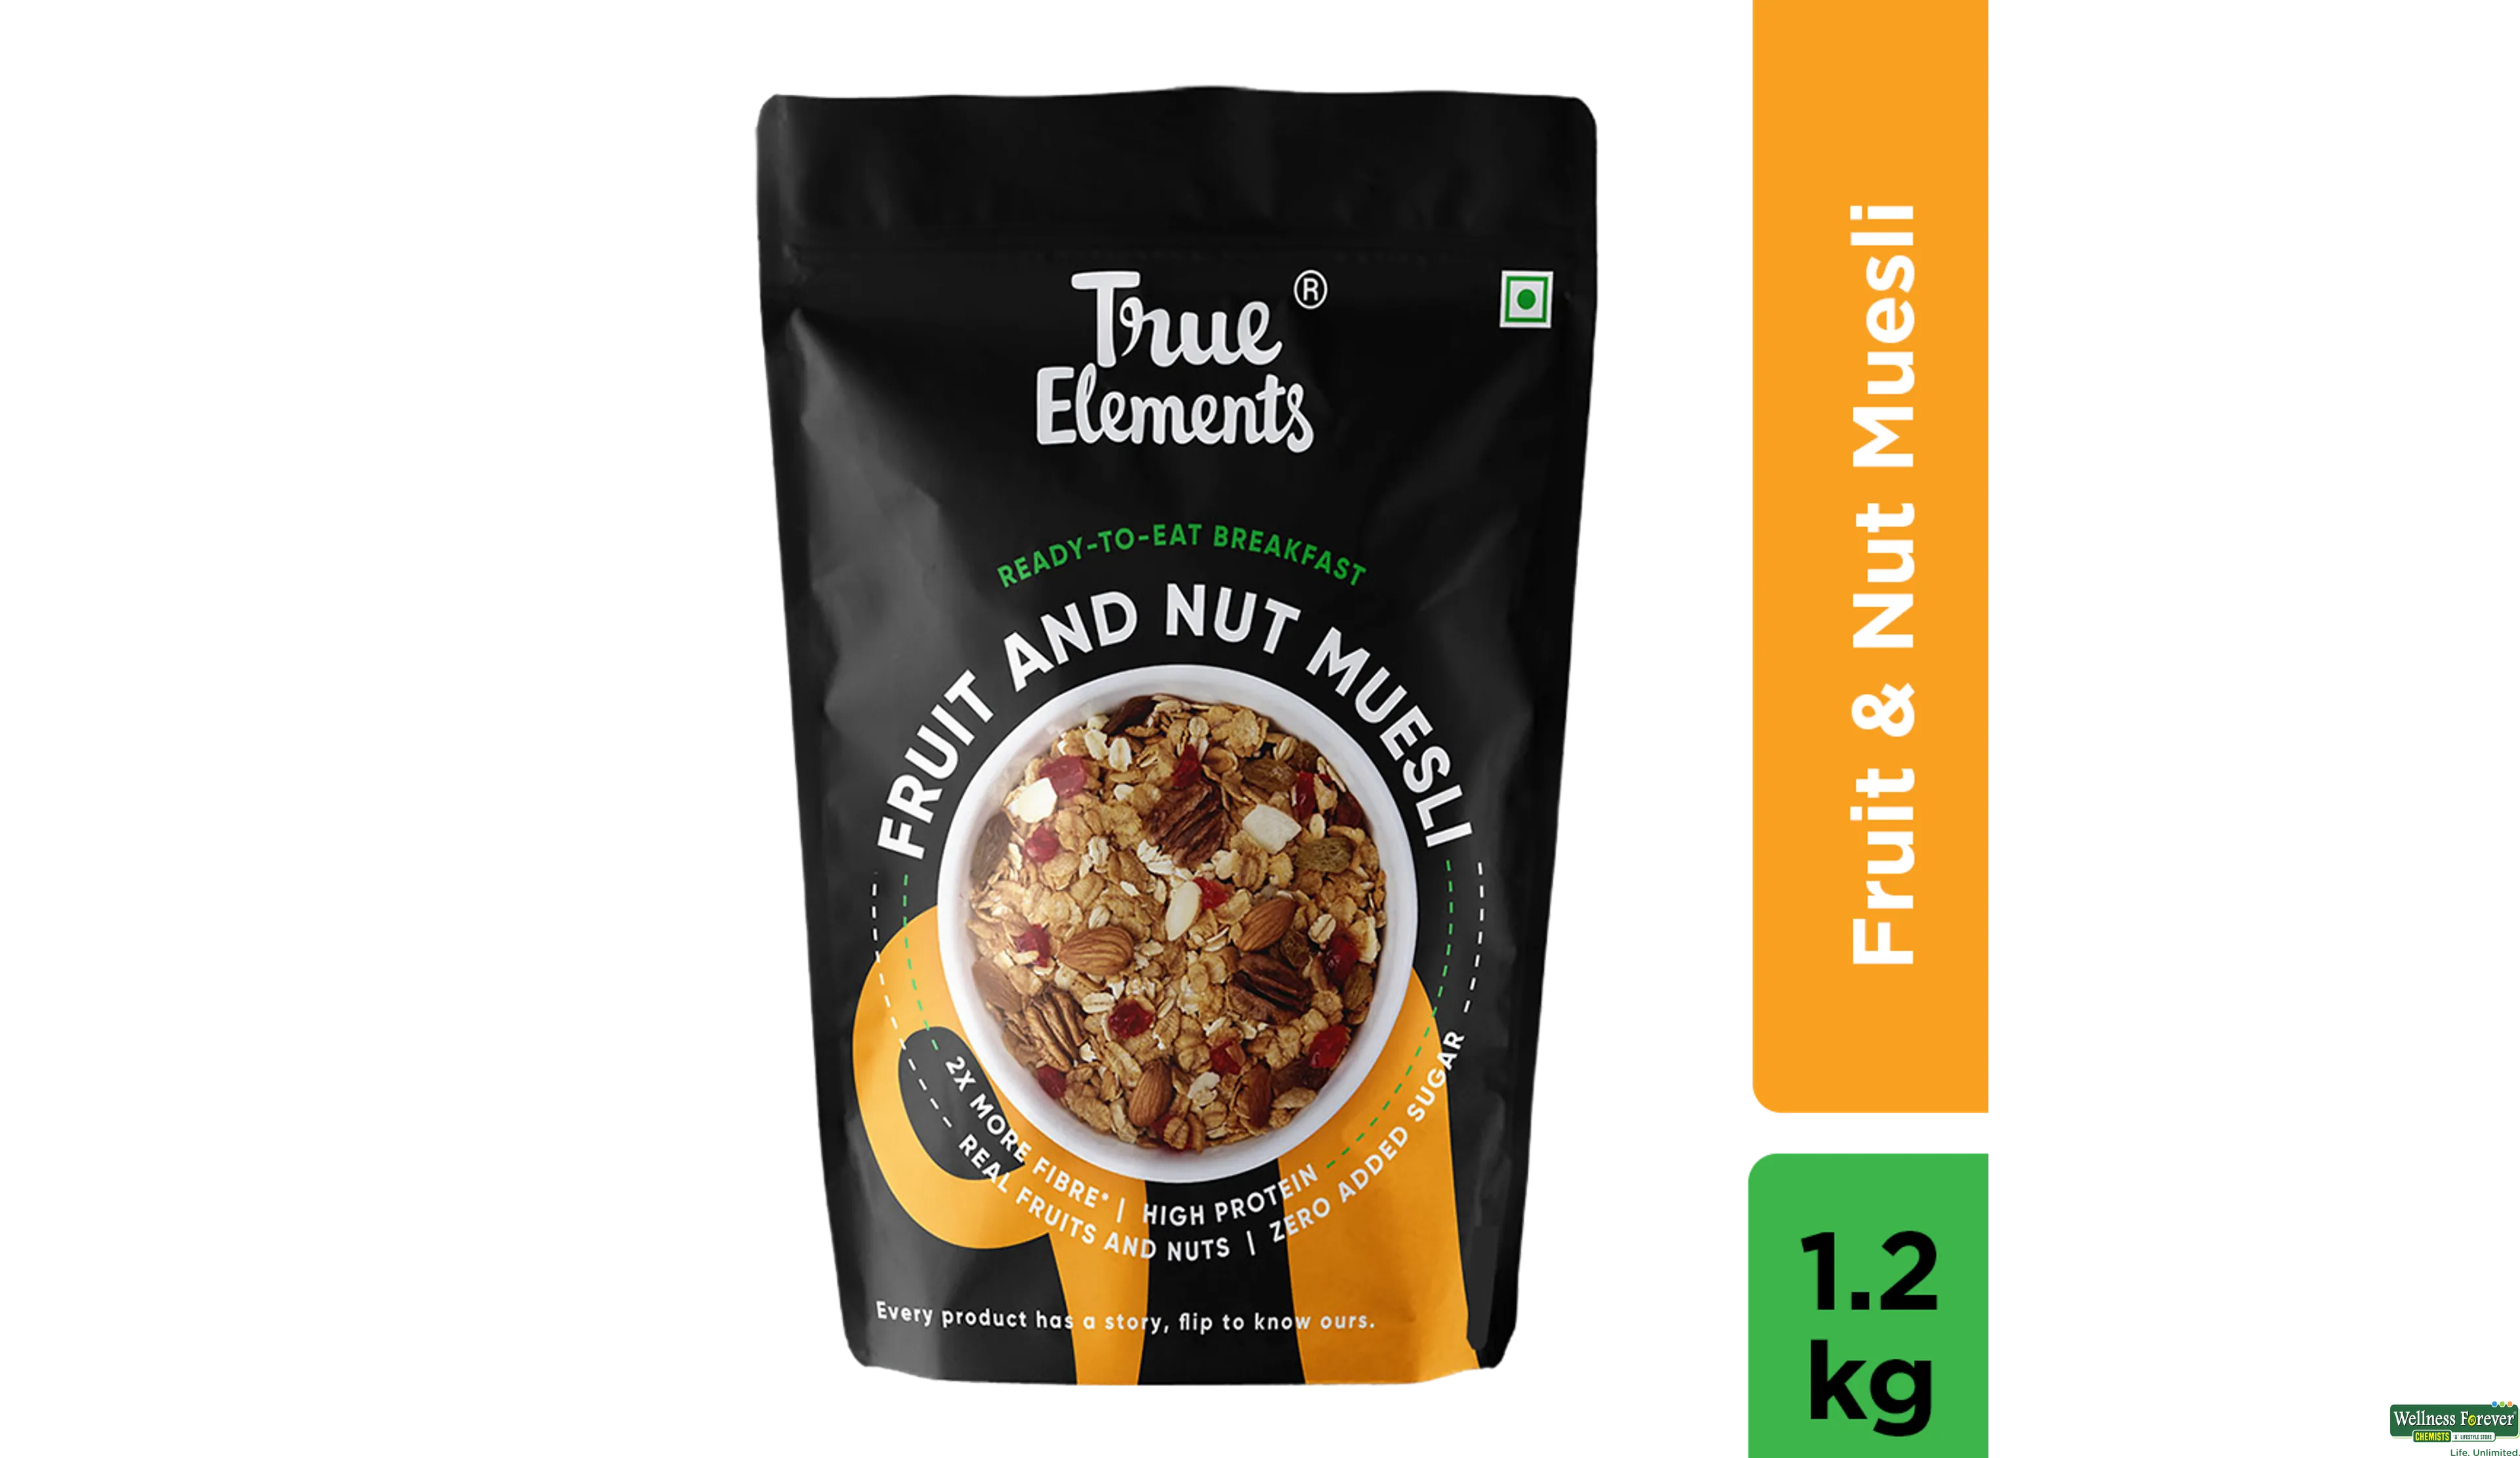 Yoga Bar Muesli - Fruits, Nuts & Seeds, 700g, 100% Rolled Oats 1.2 kg, Premium Golden Rolled Oats, Gluten Free Oats with High Fibre, 100% Whole  Grain, Non GMO, Healthy Food